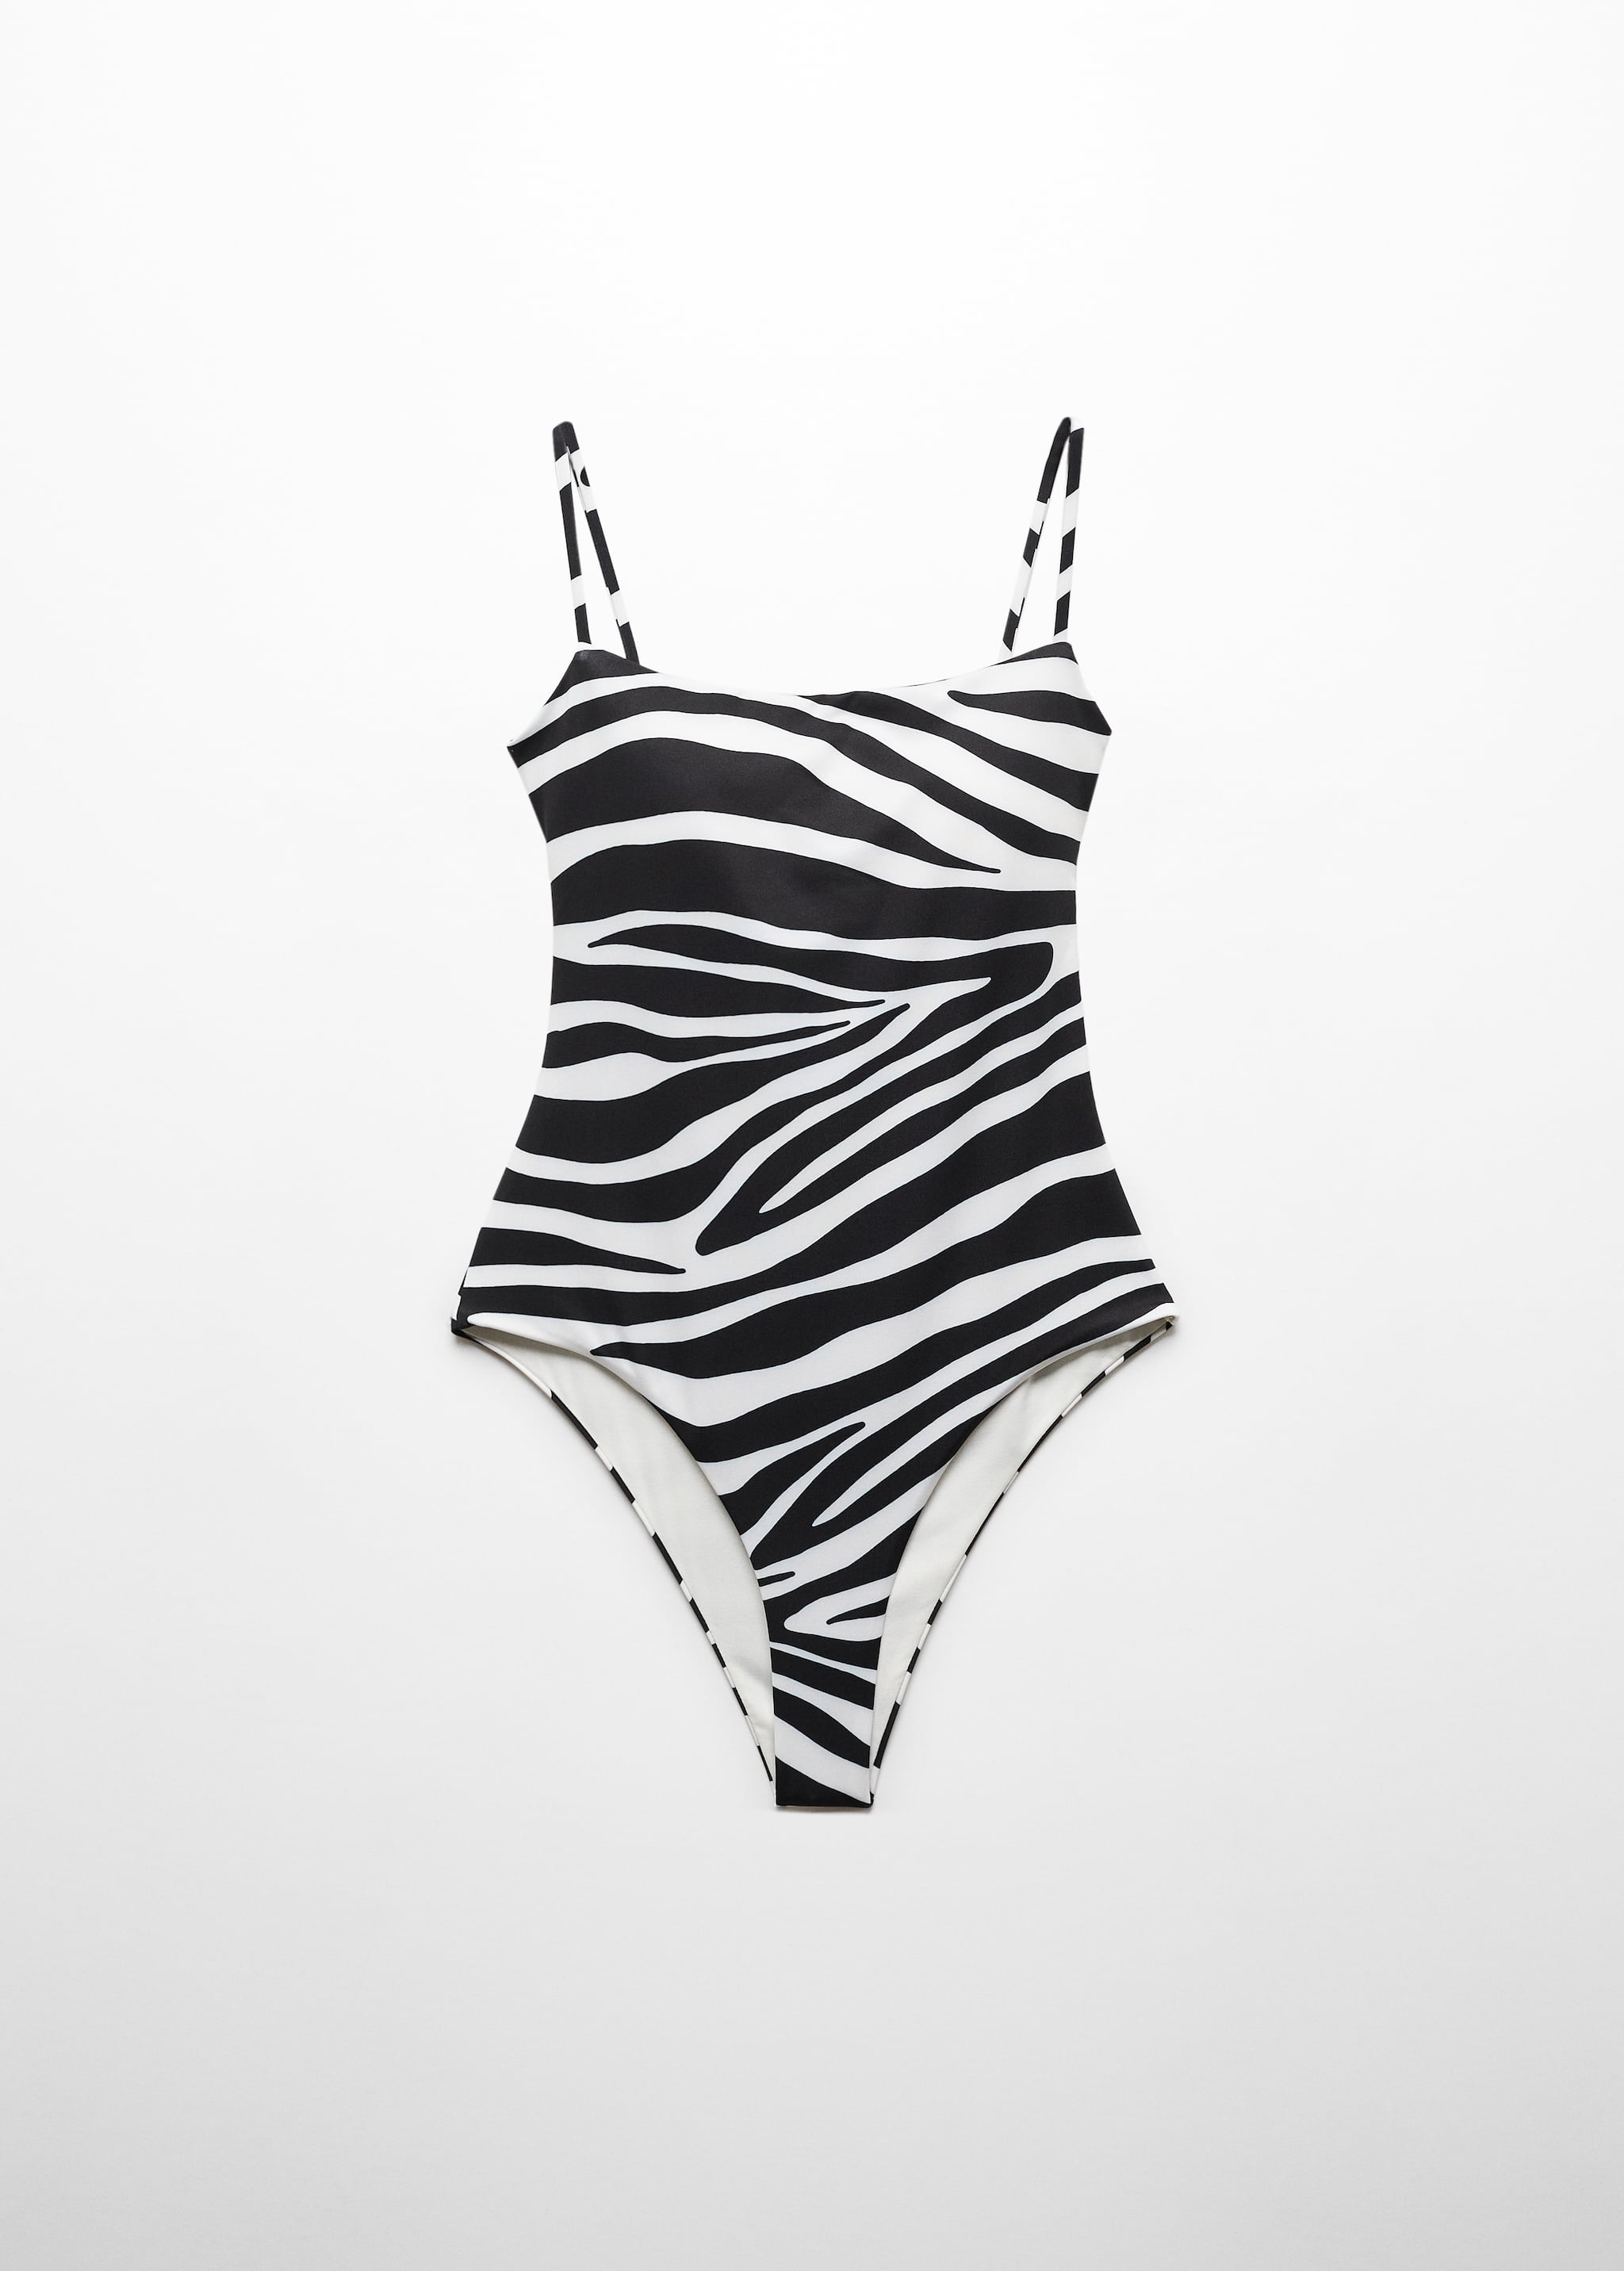 Animal print swimsuit - Article without model